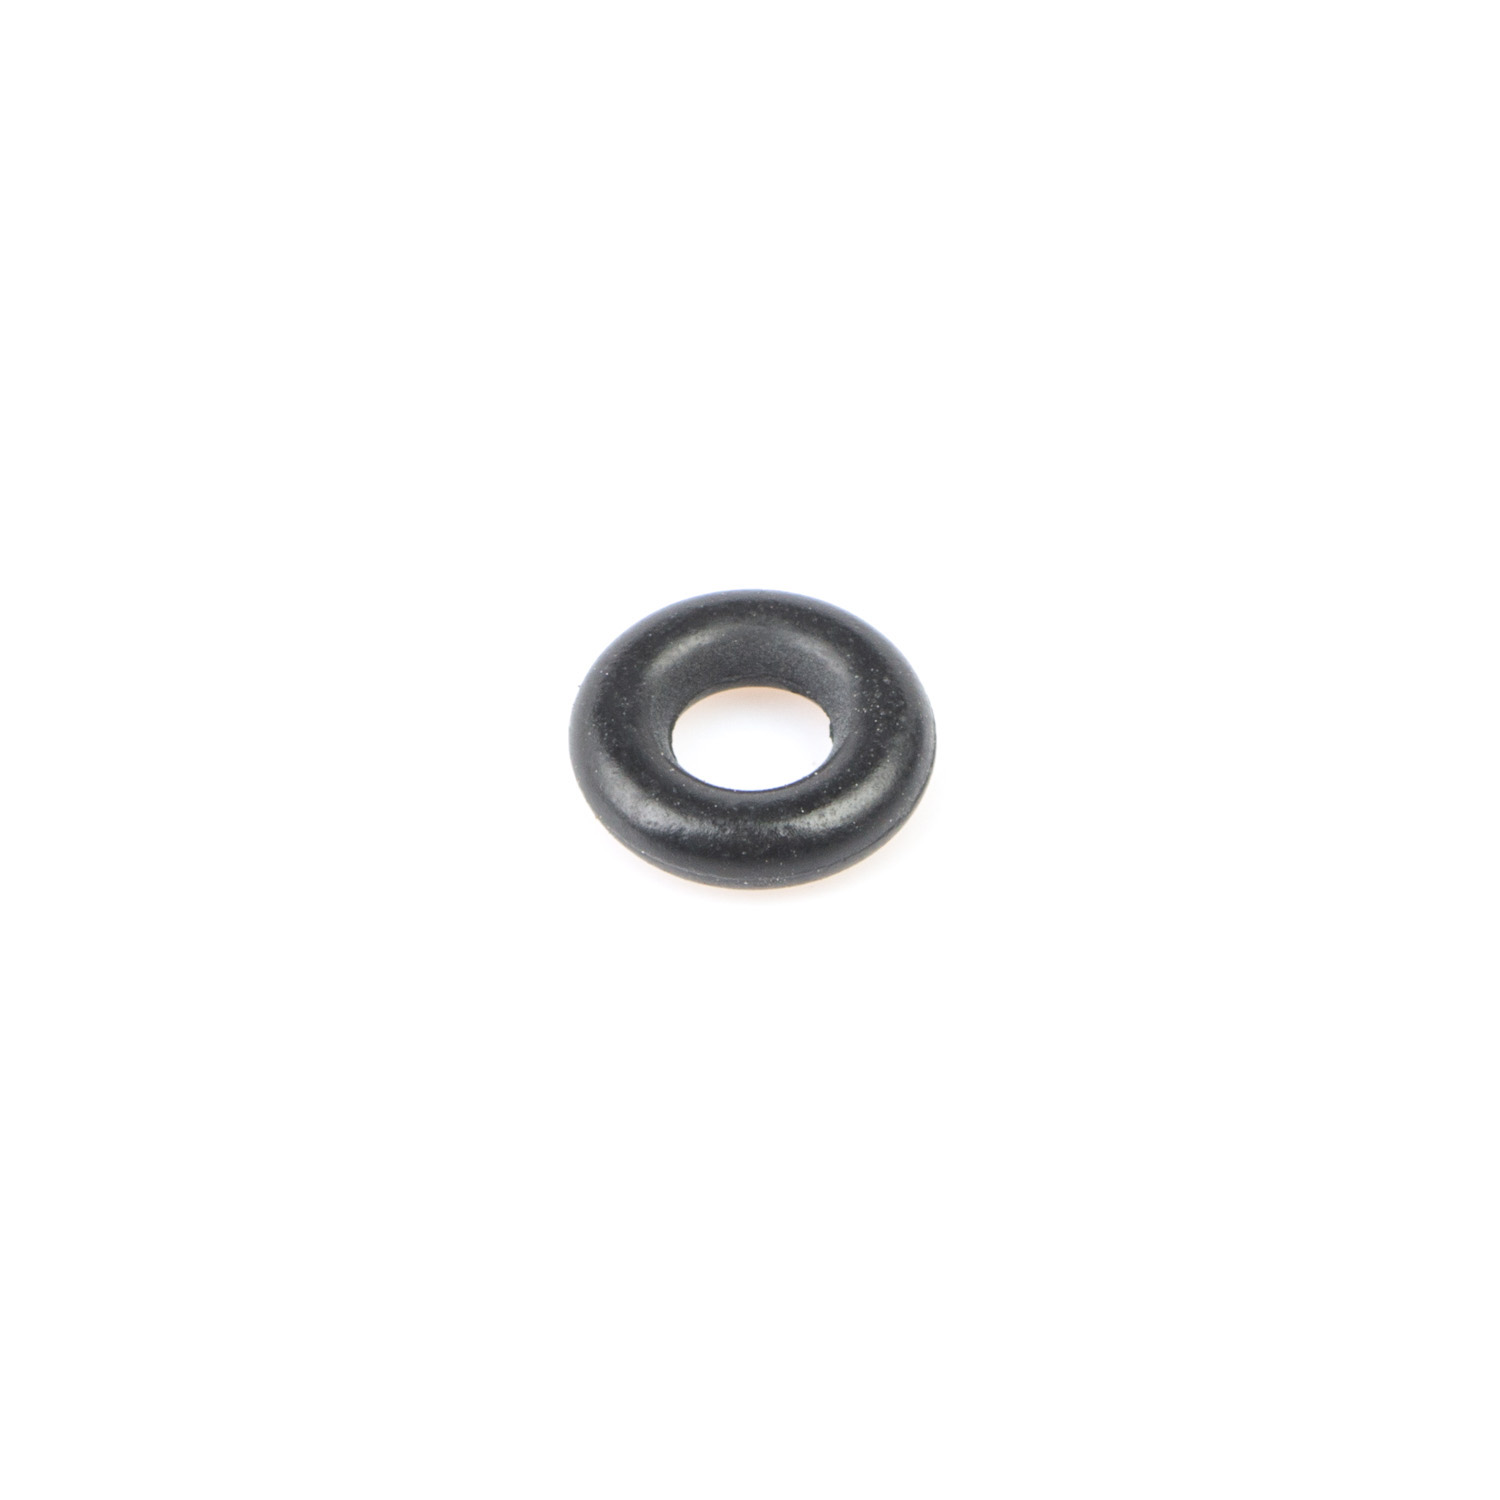 DT125 USA (Twinshock) Carb Idle Screw O-Ring 1974-1975